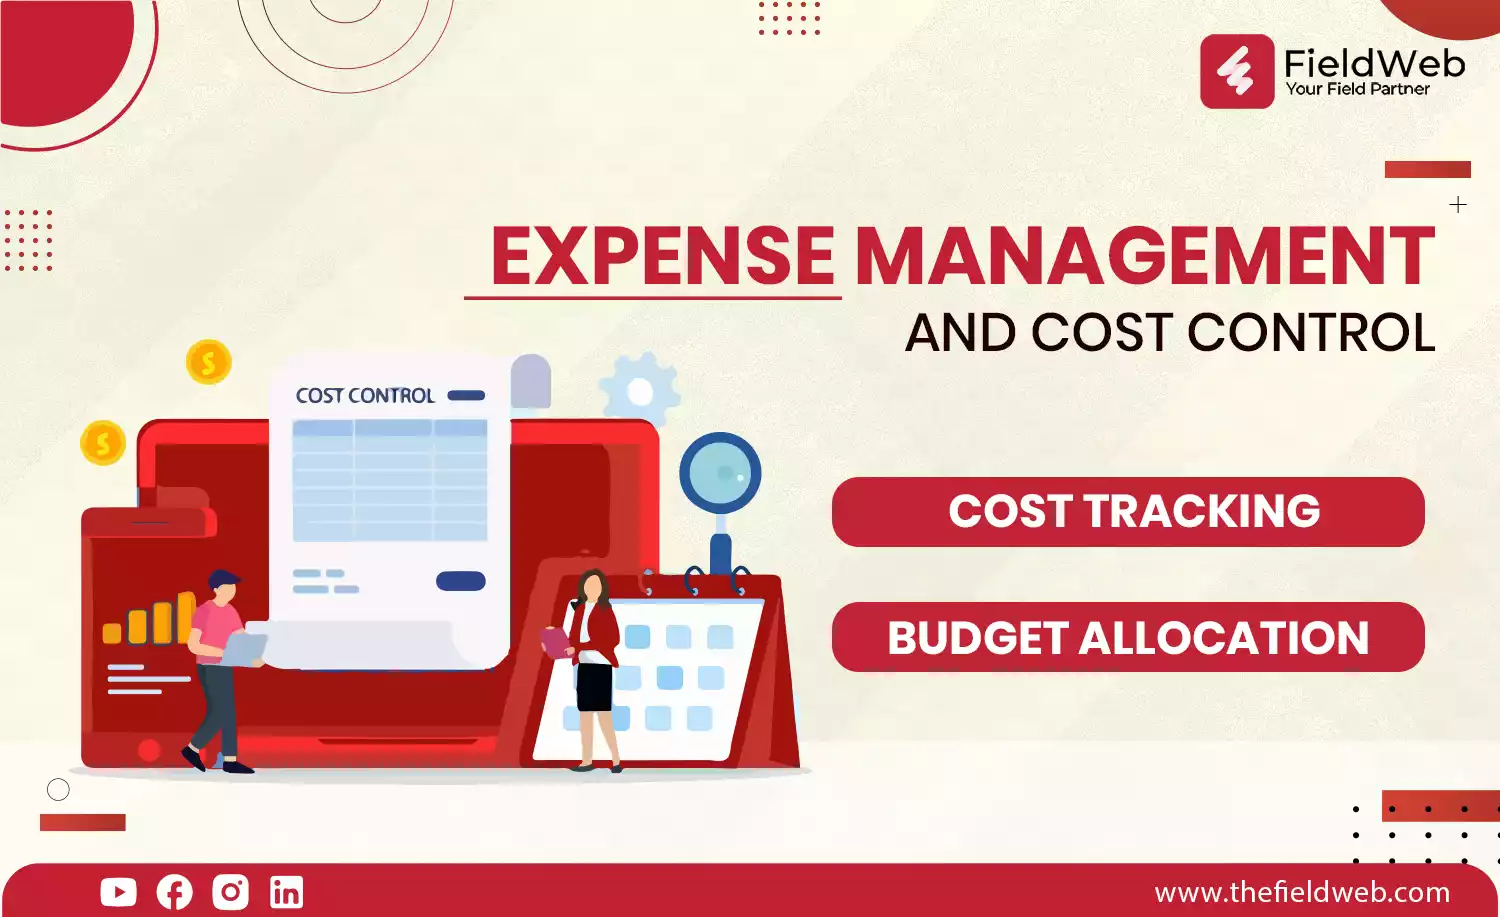 image is displaying expenses management and cost control